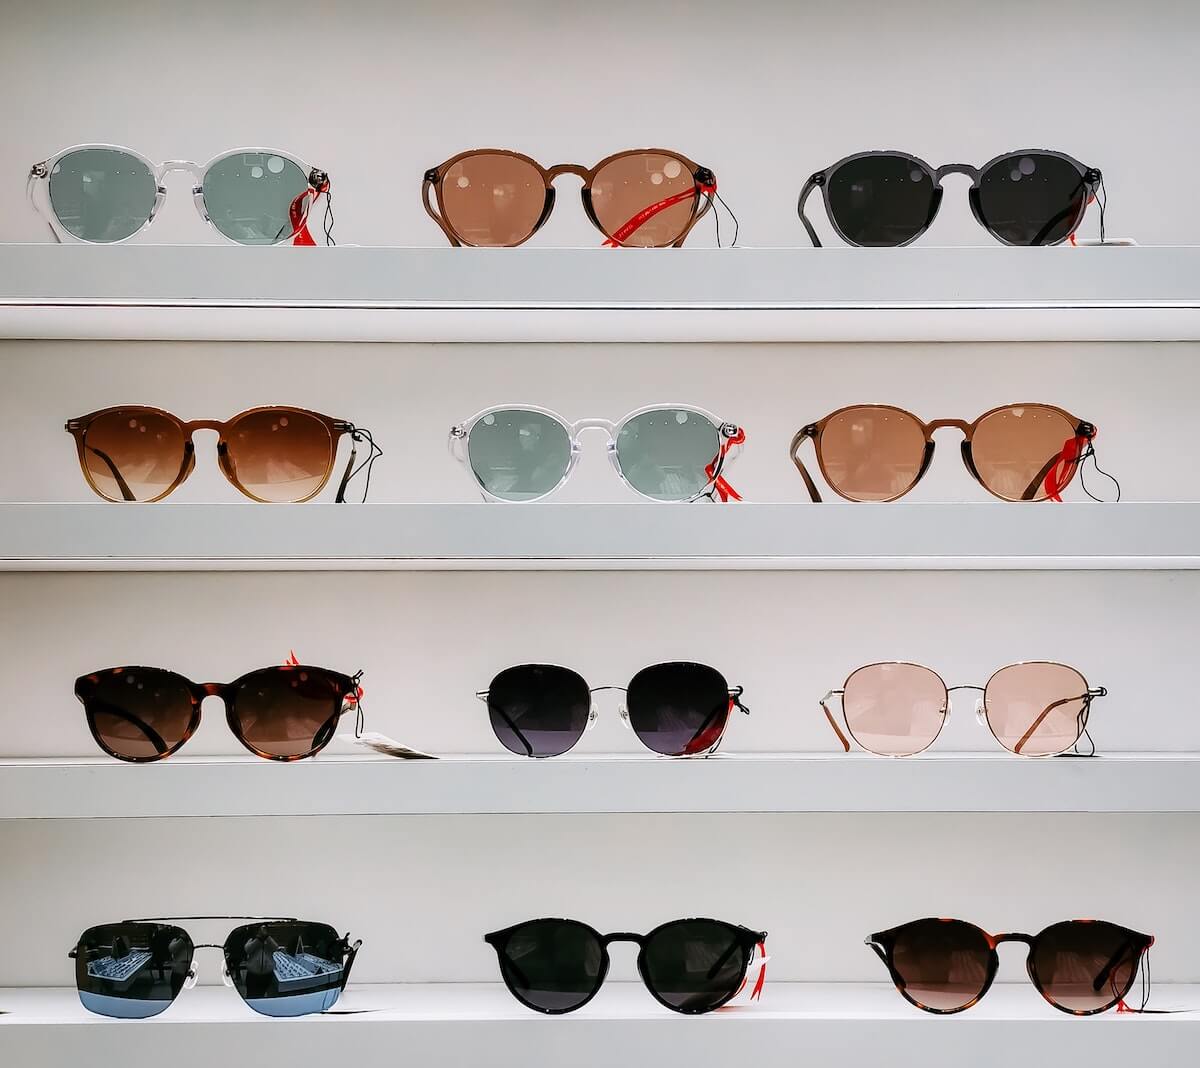 When is it Worth Paying More for Better Quality? - Sunglasses